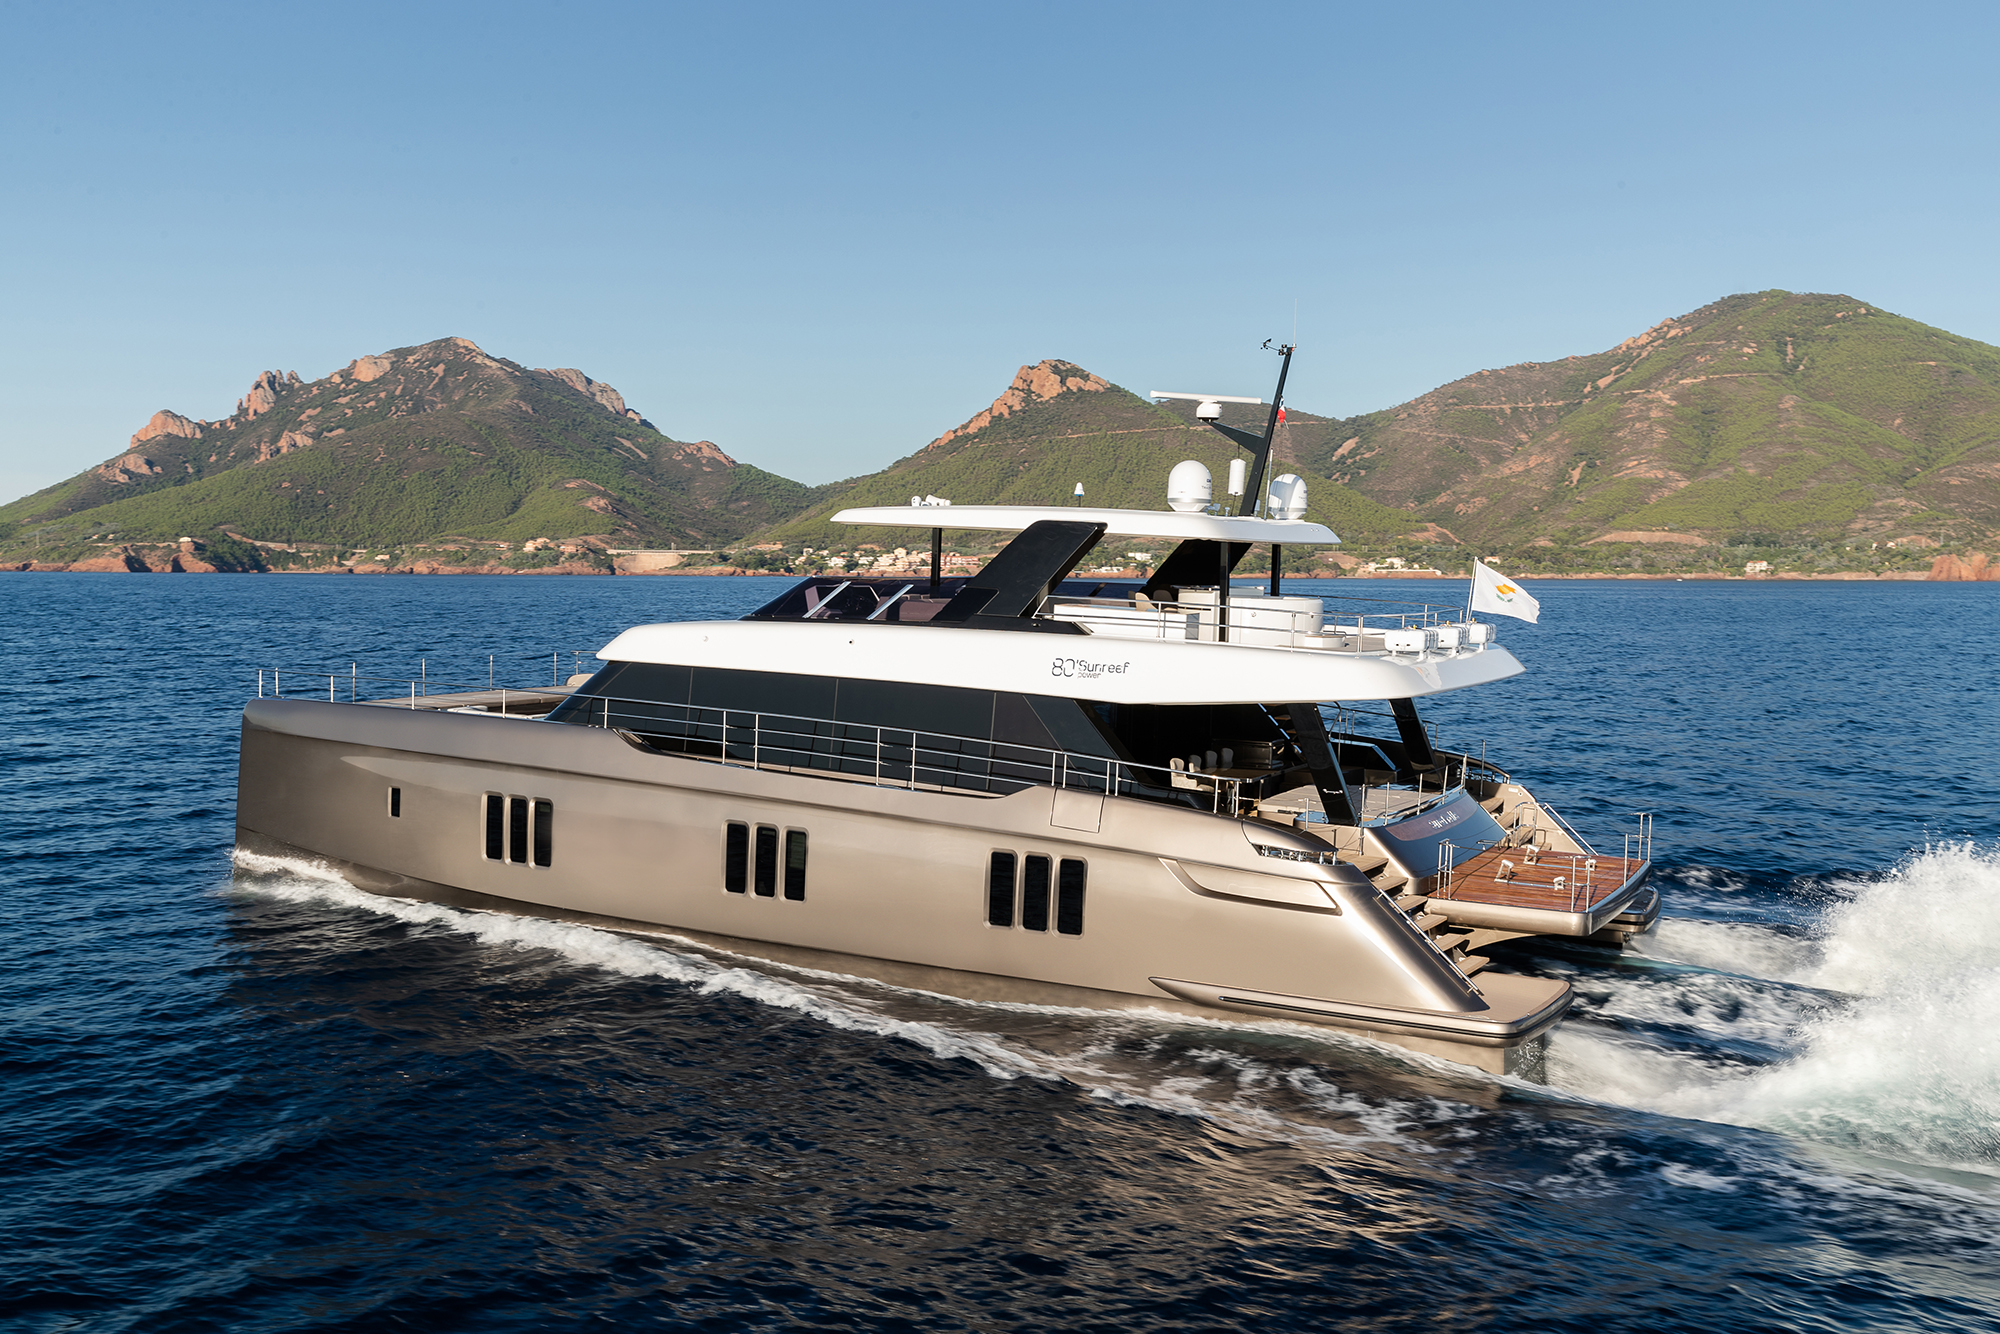 Excellence in Distance and Design: Expedition Yachts To Satisfy Your Explorer Spirit